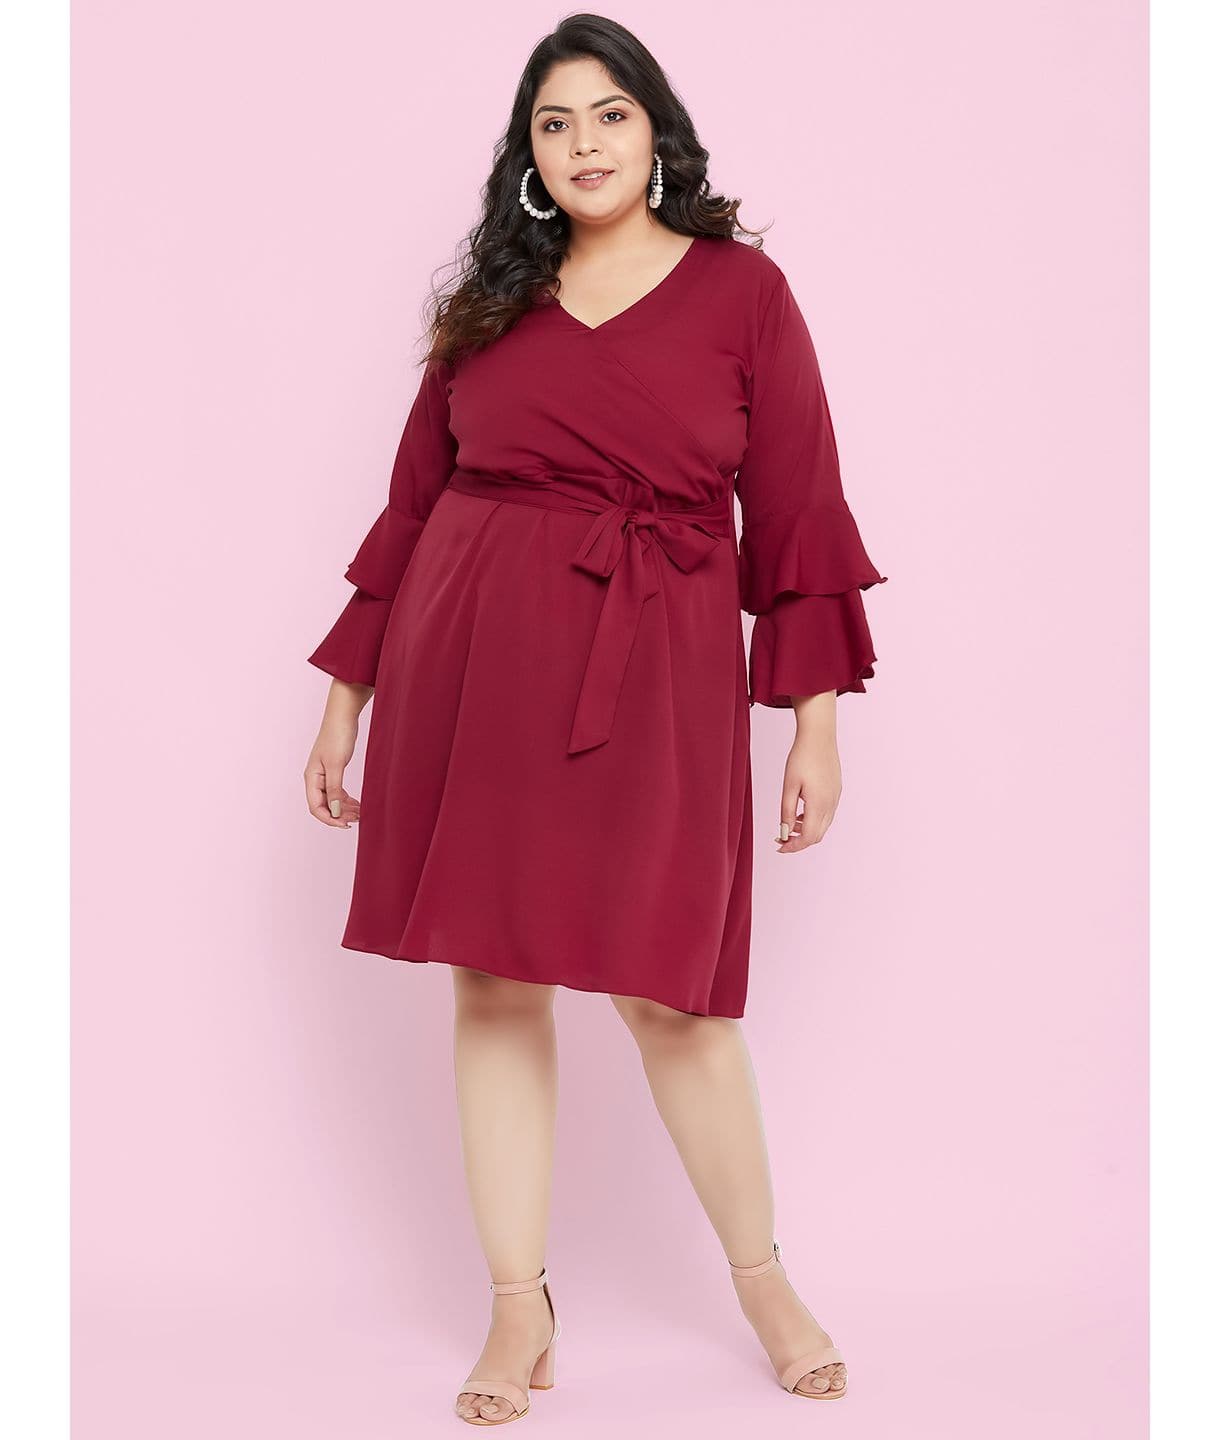 Plus Solid Red Ruffle Skater Dress - Uptownie